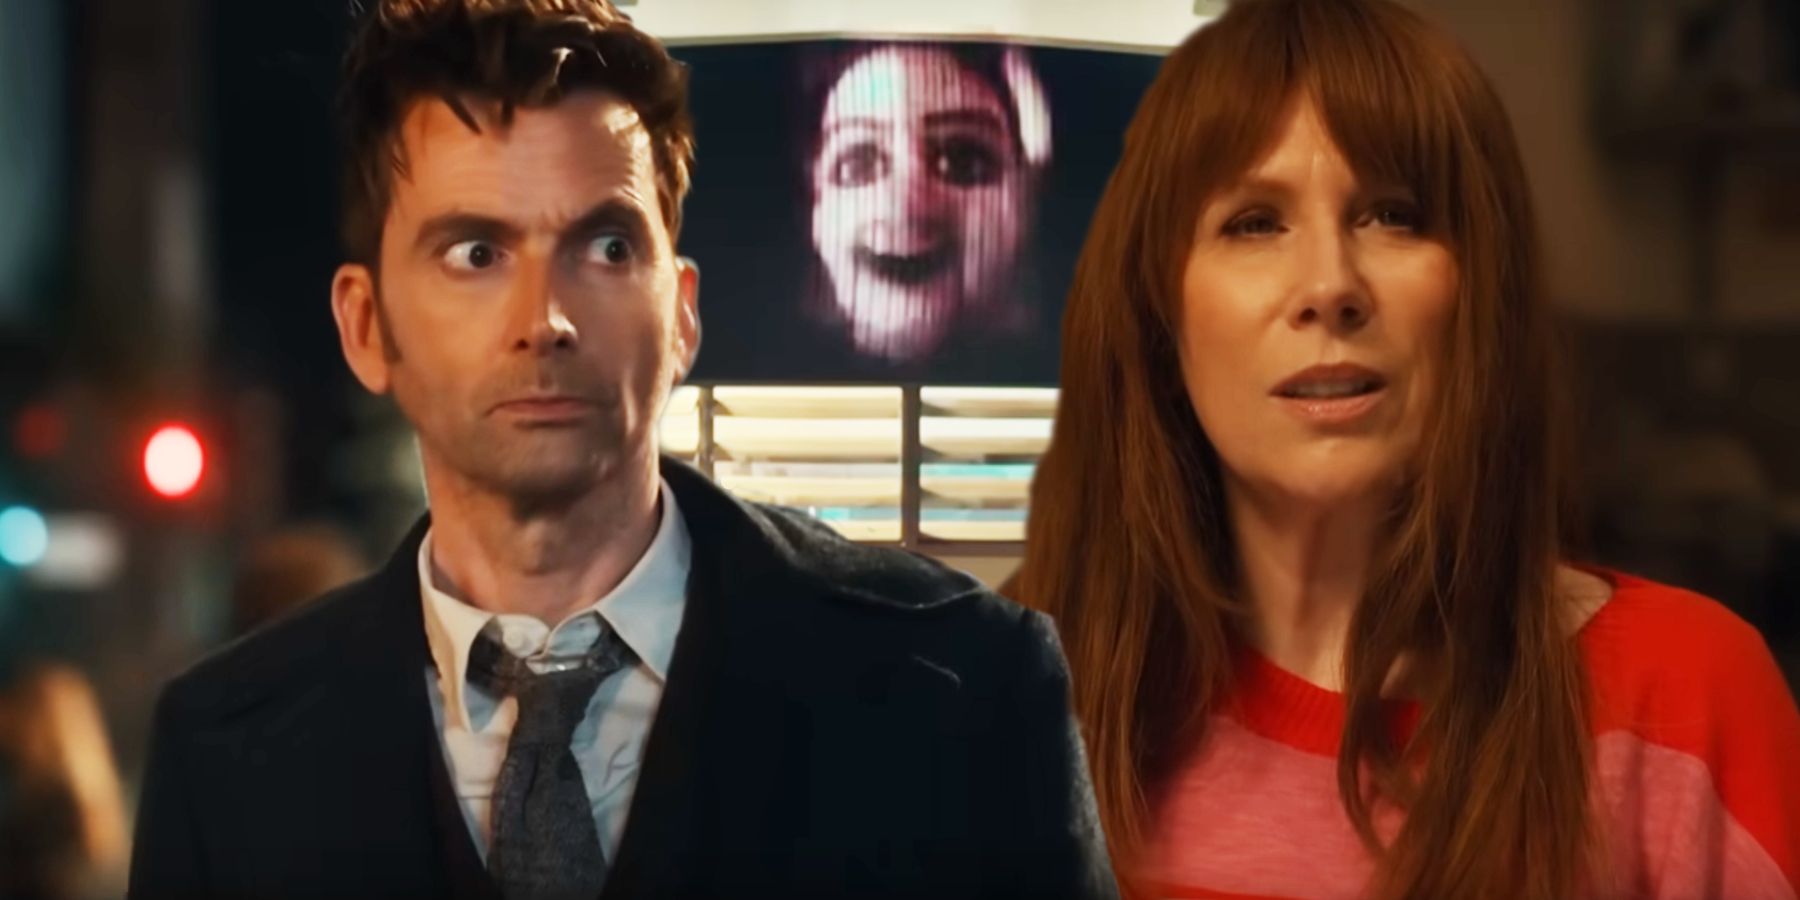 David Tennant as the Doctor and Catherine Tate as Donna Noble